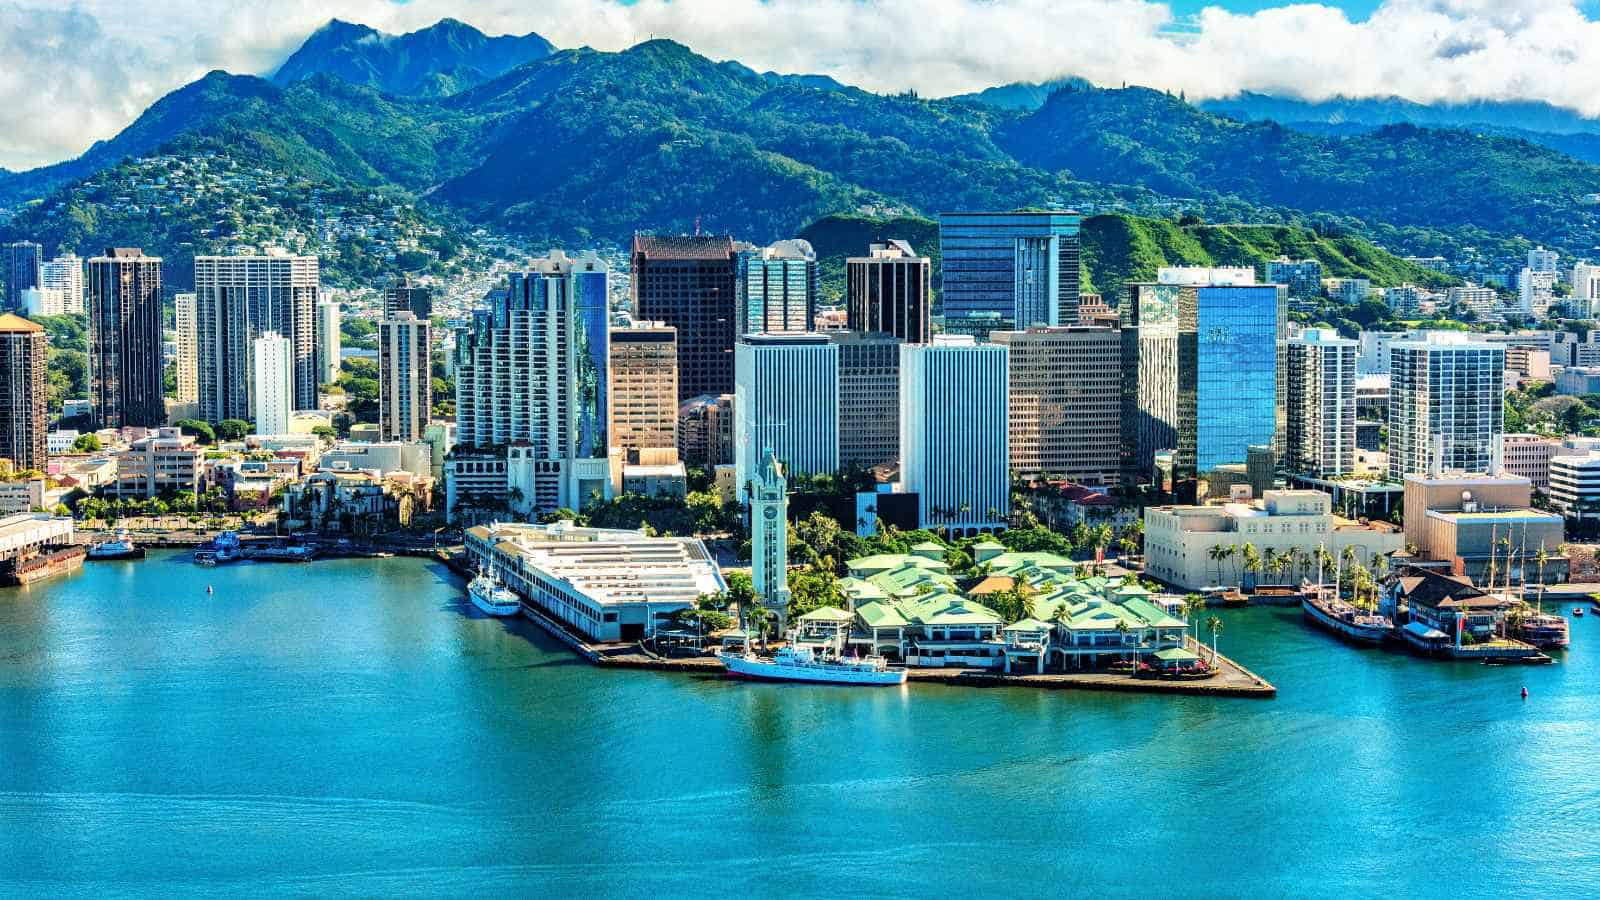 <p><span>Hawaii is a dream destination for many with its picturesque beaches, lush greenery, and unique <a href="https://frenzhub.com/best-destinations-for-rv-campers-in-america/">volcanic landscapes</a>. As one of the 50 states of the US, no passport is needed to travel to Hawaii for US citizens. So, pack your bags and get ready to experience aloha in this tropical paradise.</span></p>